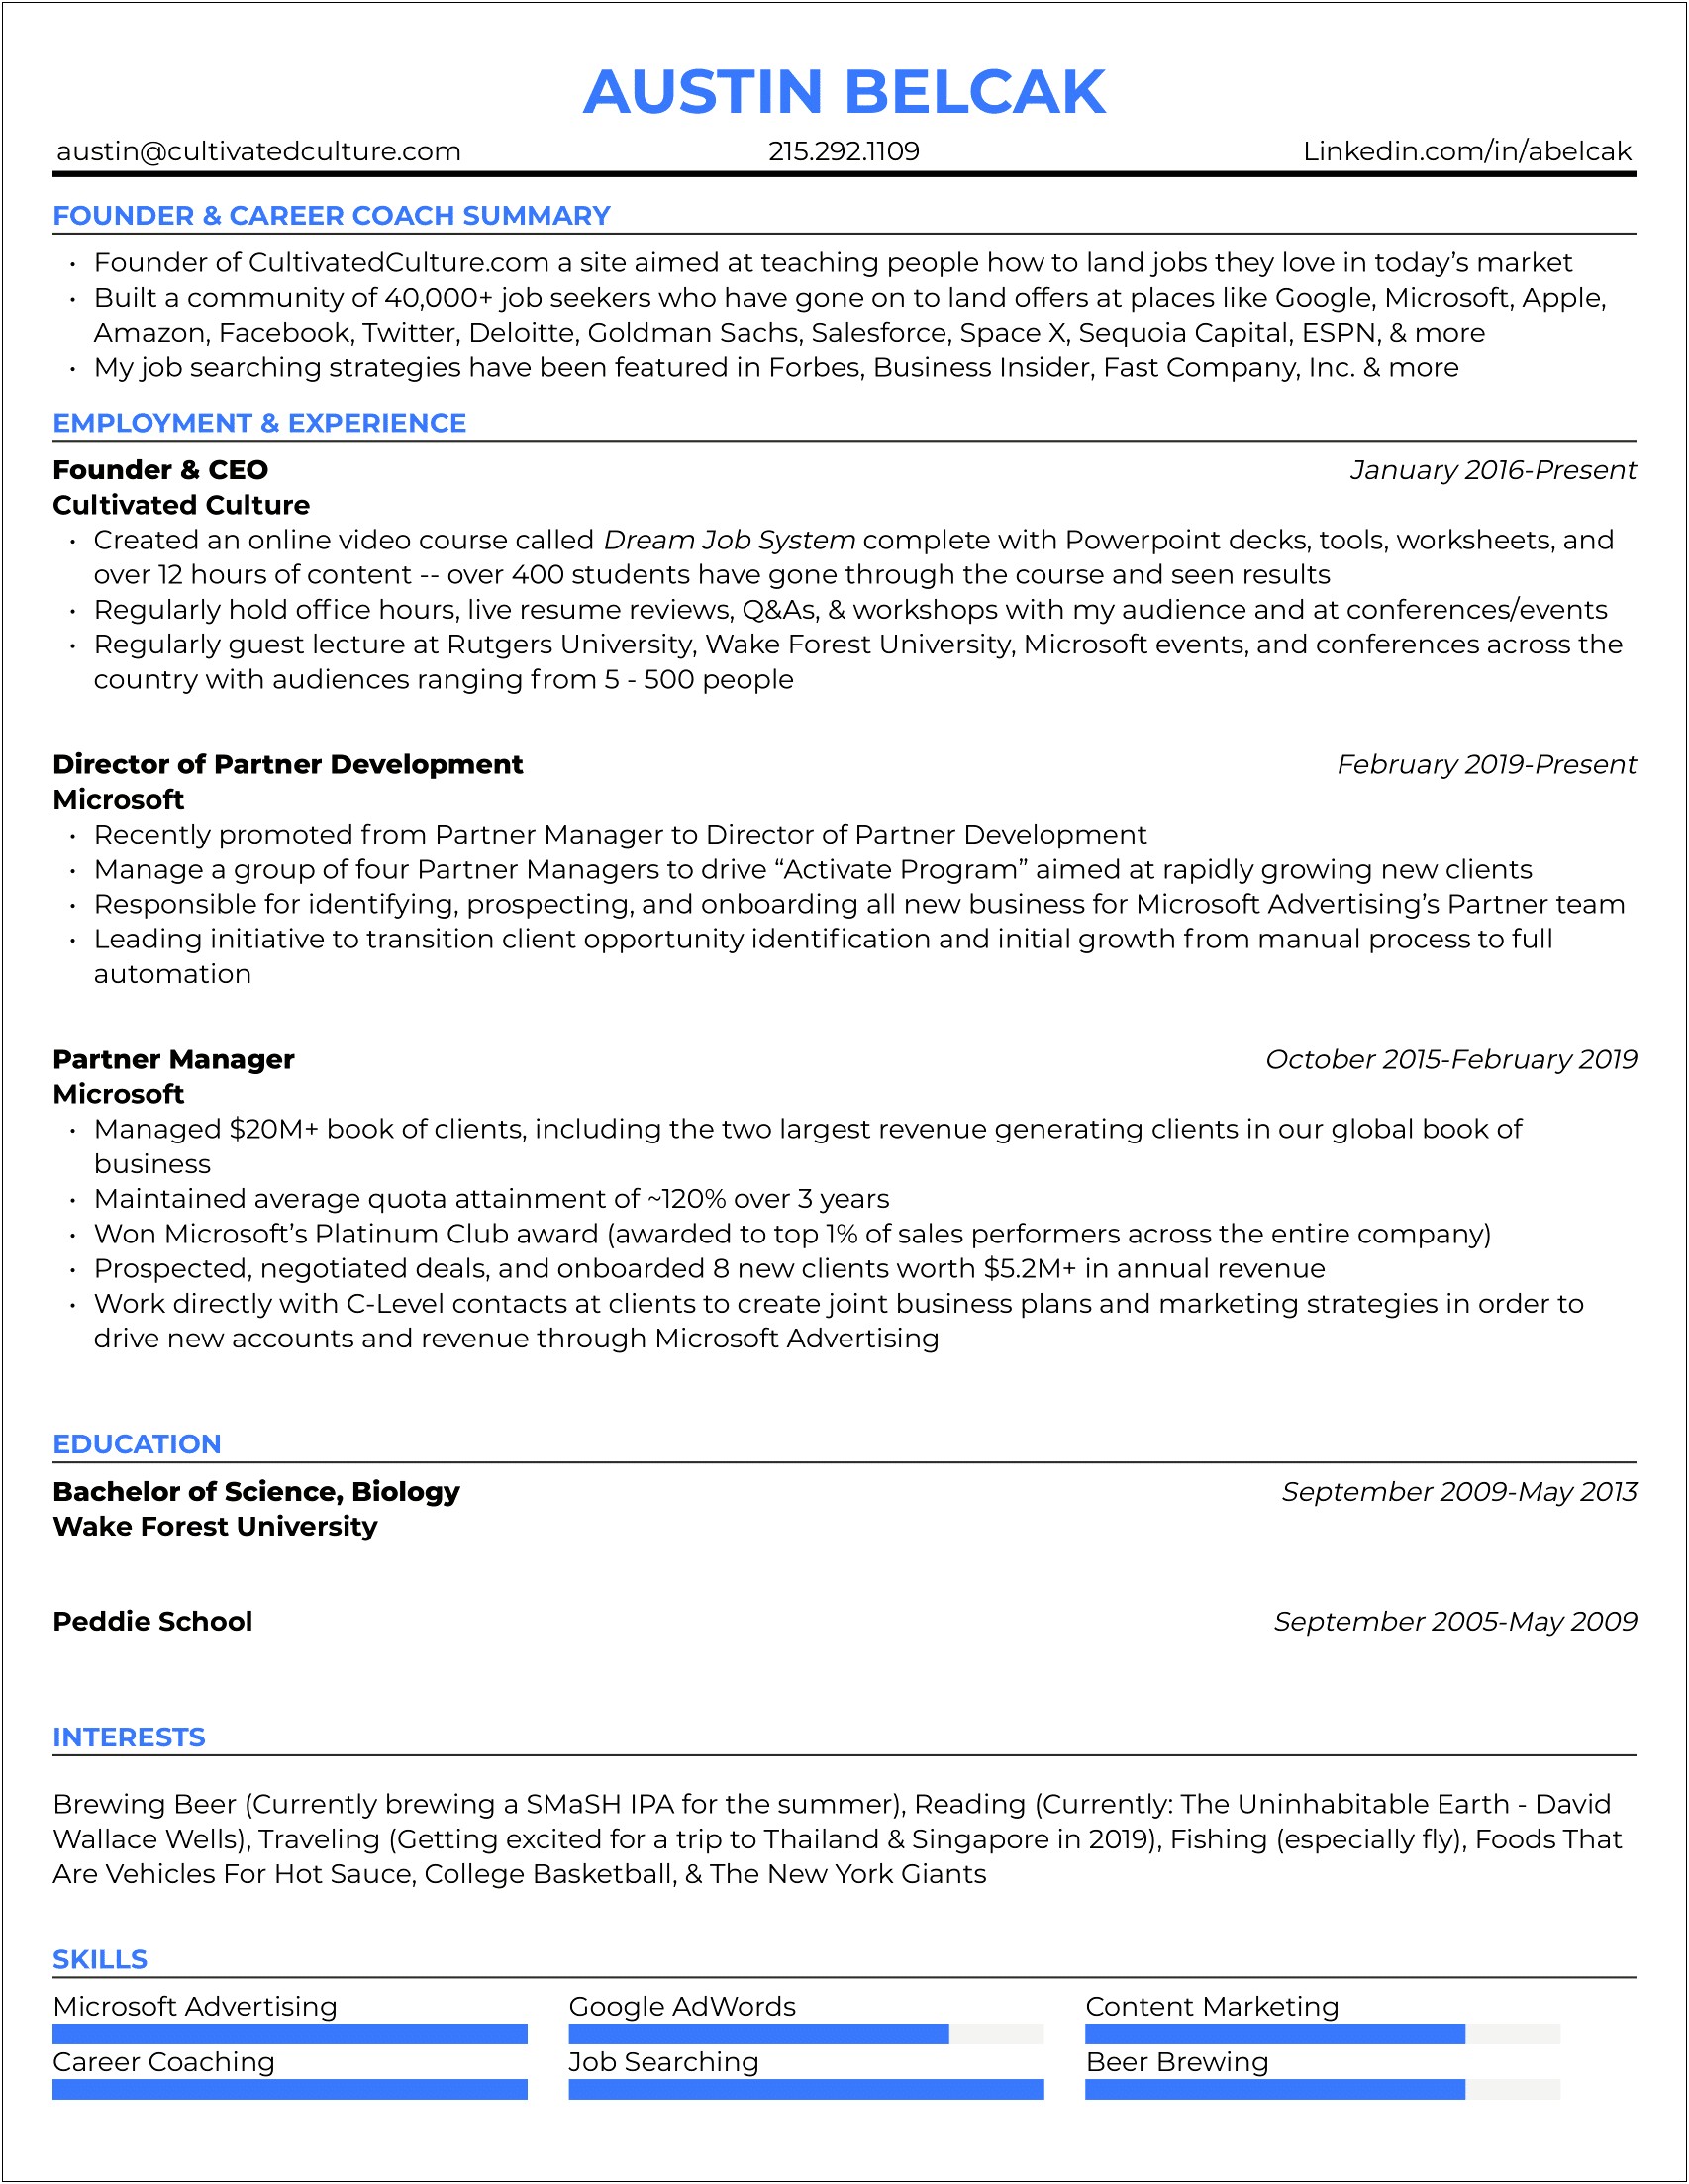 Best Fonts Styles For Resumes 2019